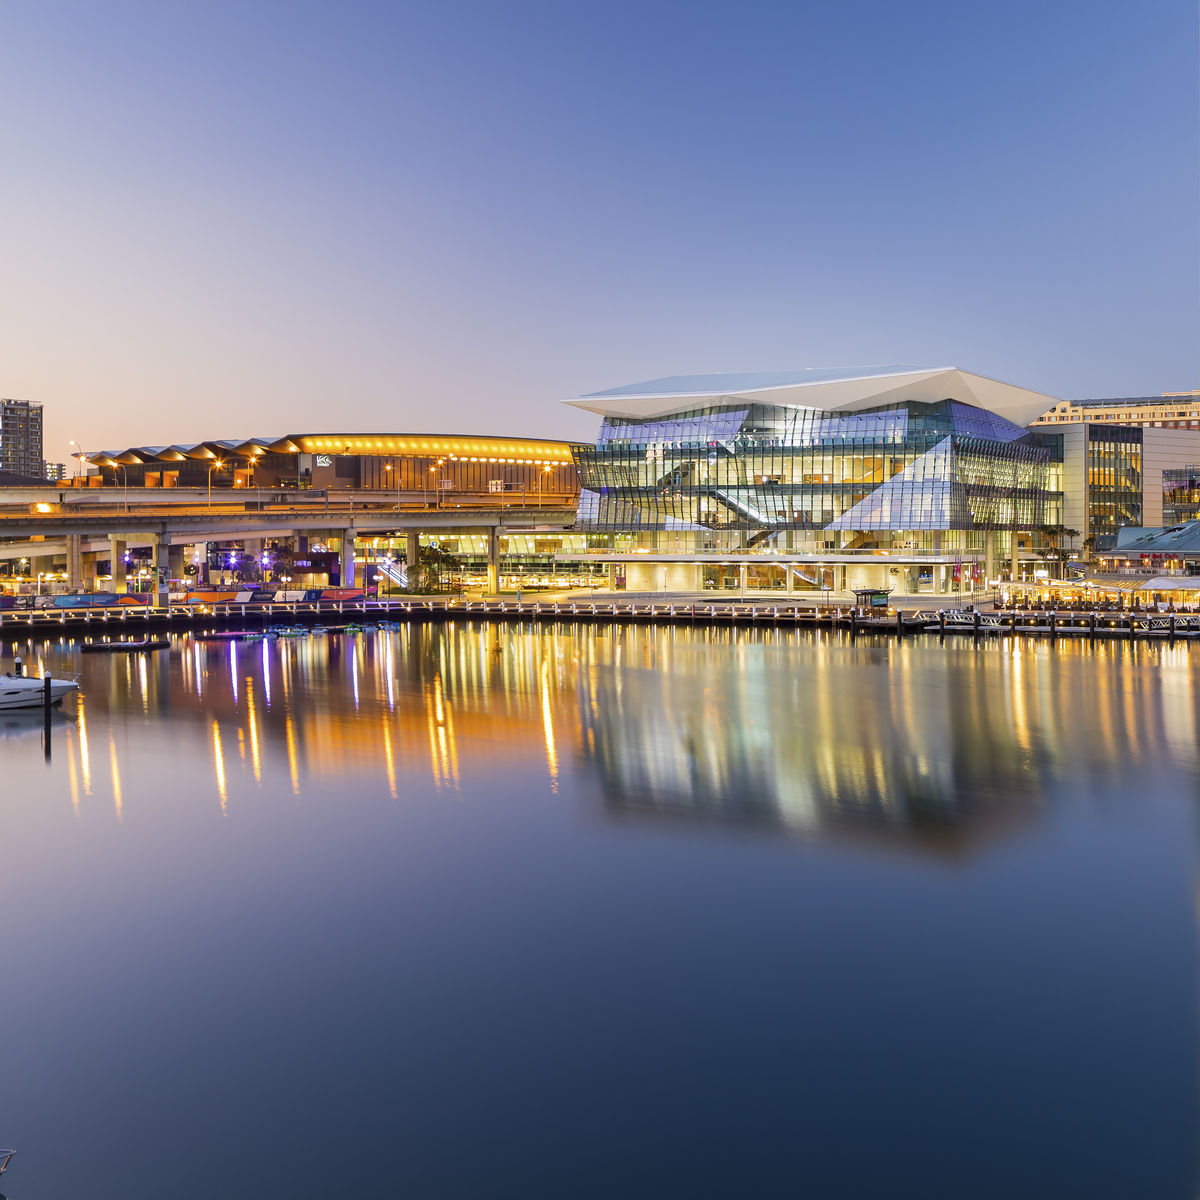 Exterior Image of International Convention Center Sydney at dusk on the water